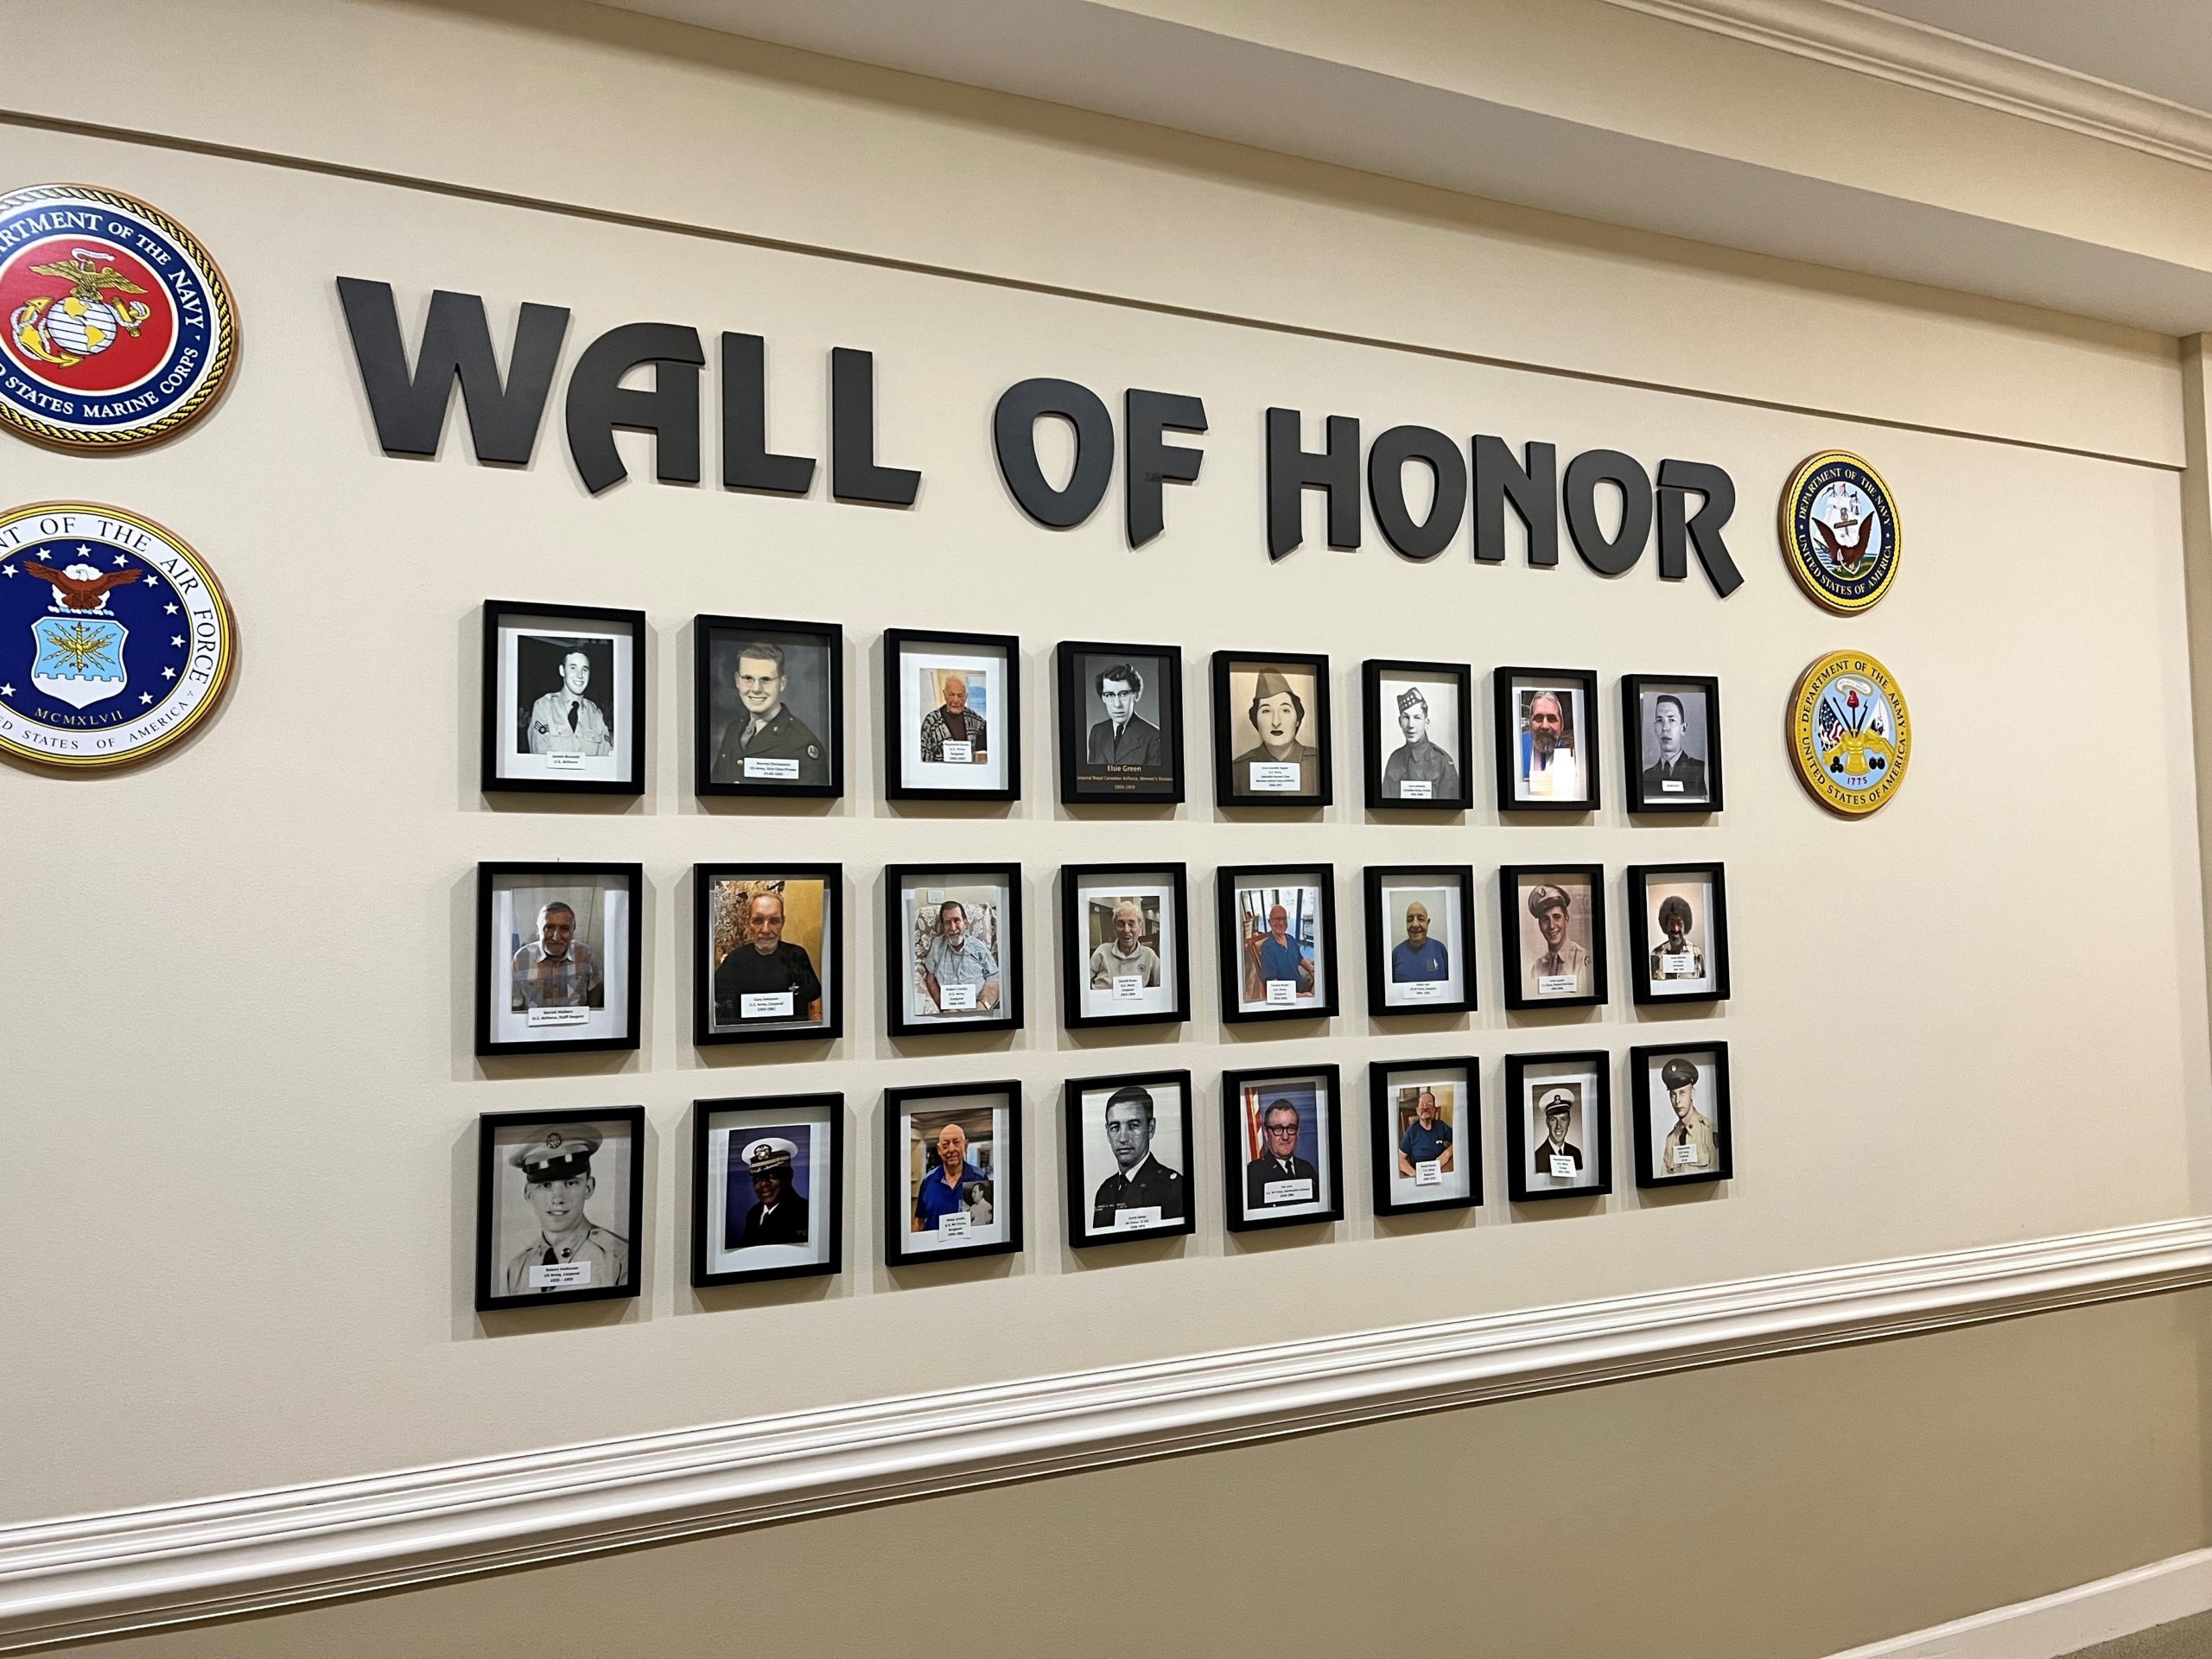 Wall of Honor at Retirement Community in Surprise AZ